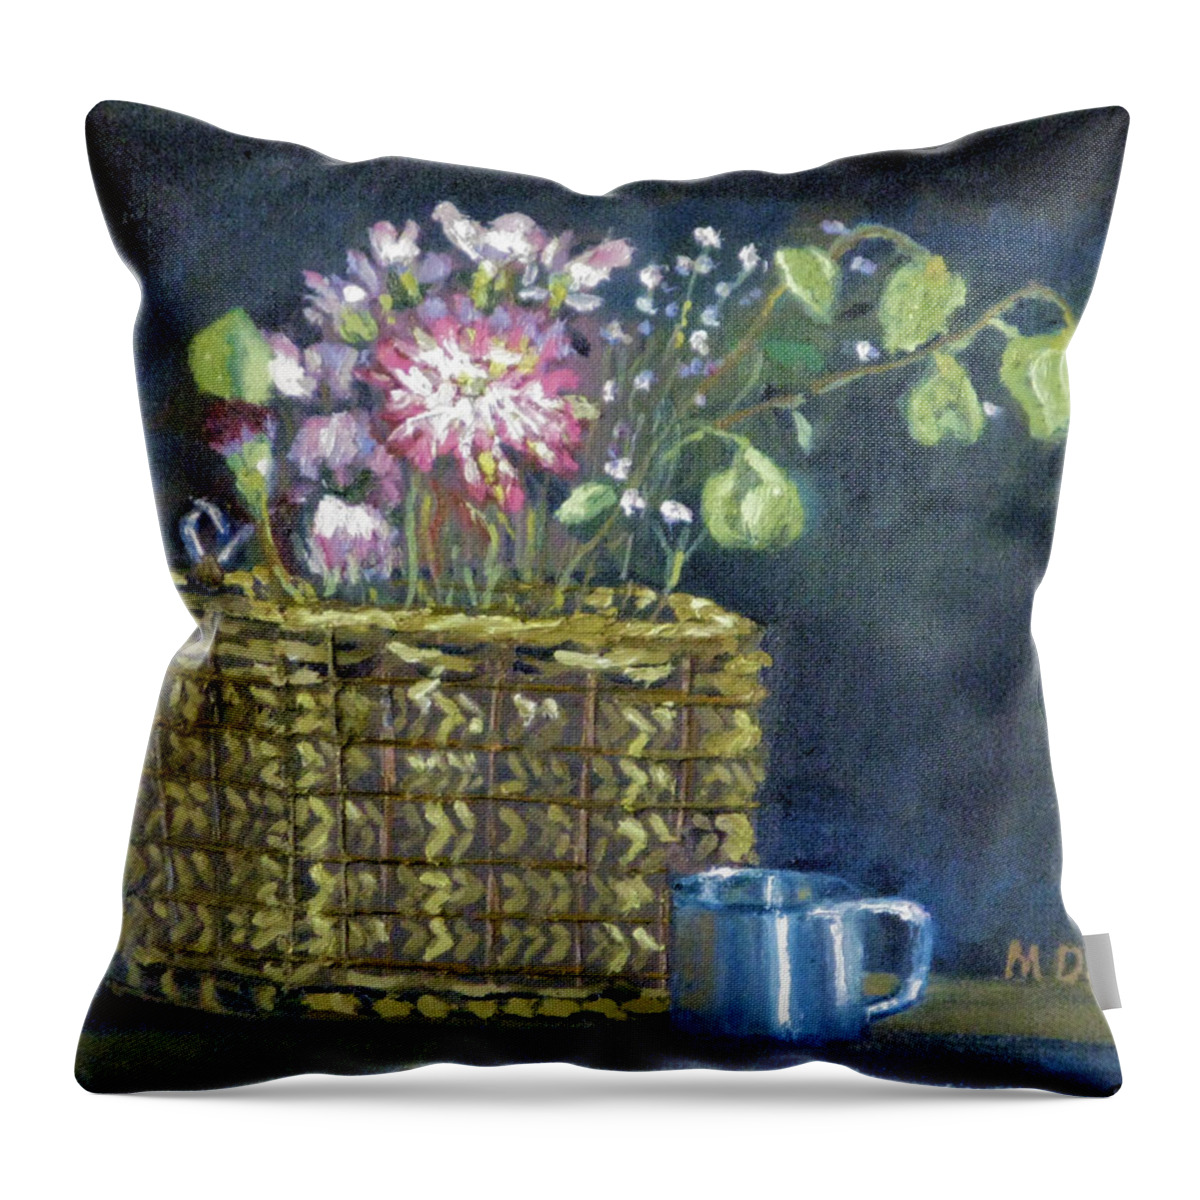 Flower Throw Pillow featuring the painting Dying Flowers by Michael Daniels